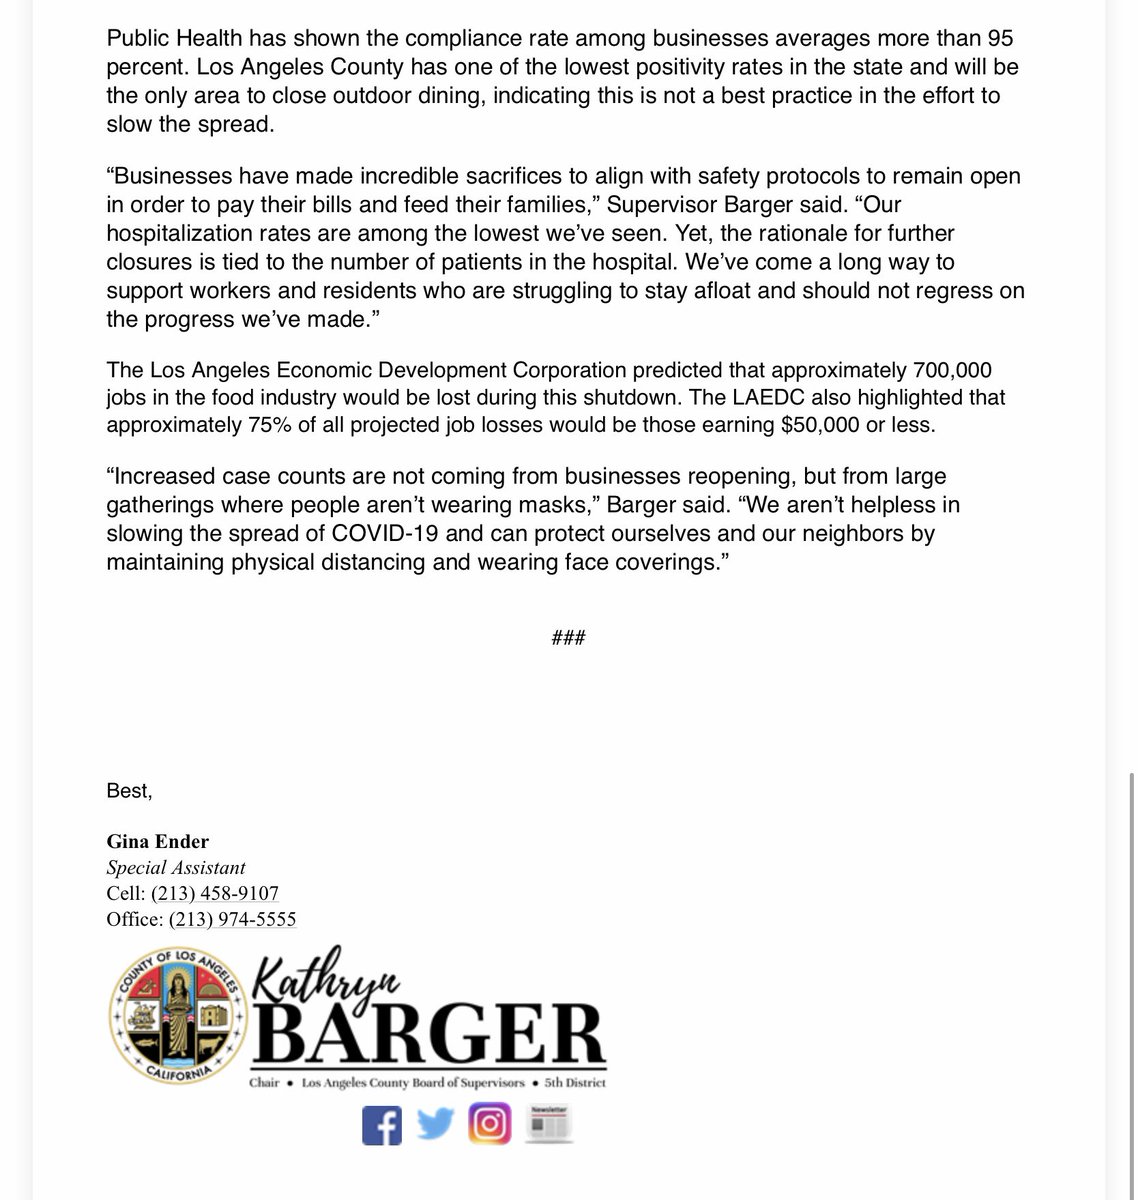 NEW: L.A. County Supervisor Board Chair  @kathrynbarger has released a statement saying she OPPOSES the  @lapublichealth decision to restrict outdoor dining. She says the decision will devastate local businesses and will cause more people to go indoors where true spread is.  @FOXLA